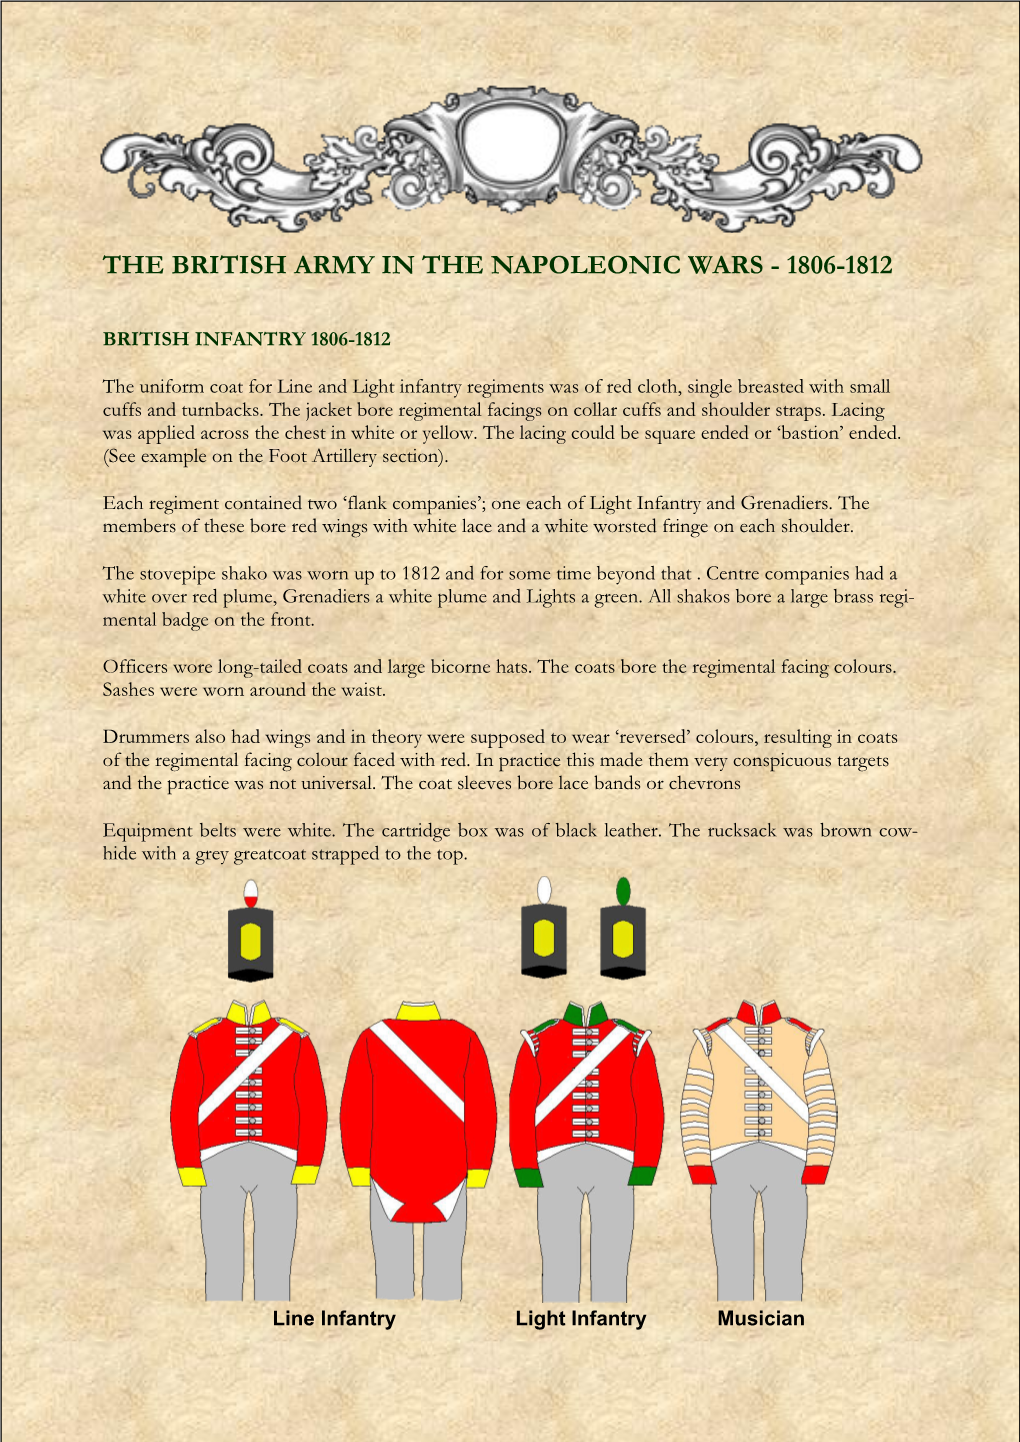 The British Army in the Napoleonic Wars - 1806-1812